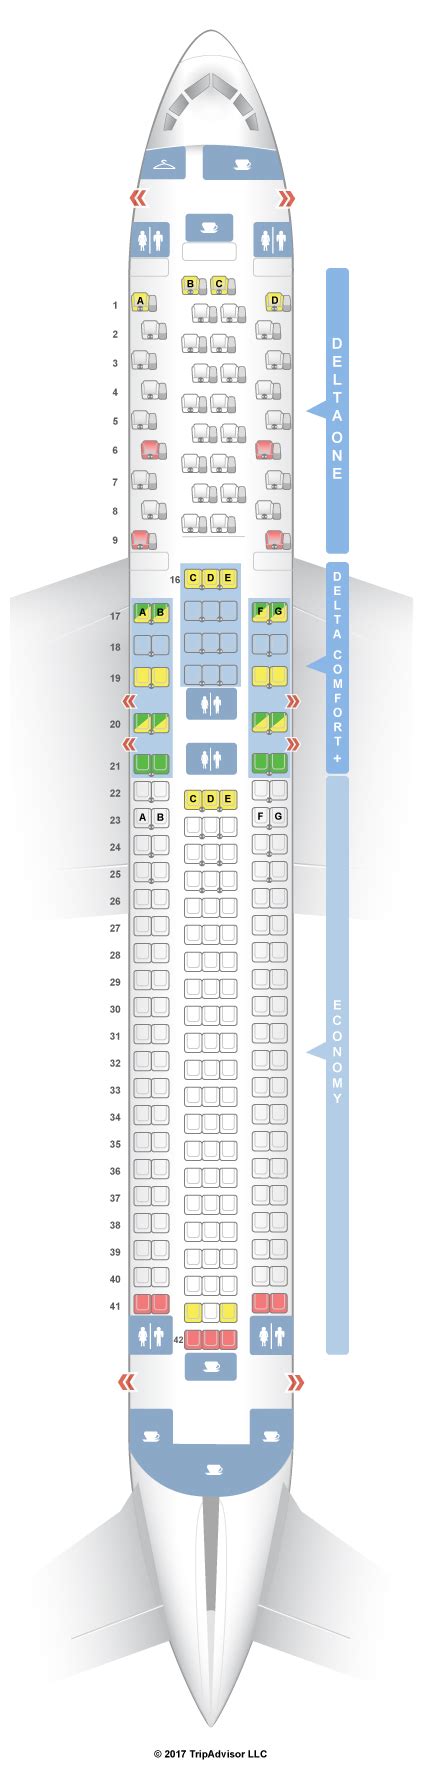 For your next Delta flight, use this seating chart to get the most comfortable seats, legroom, and recline on .. 